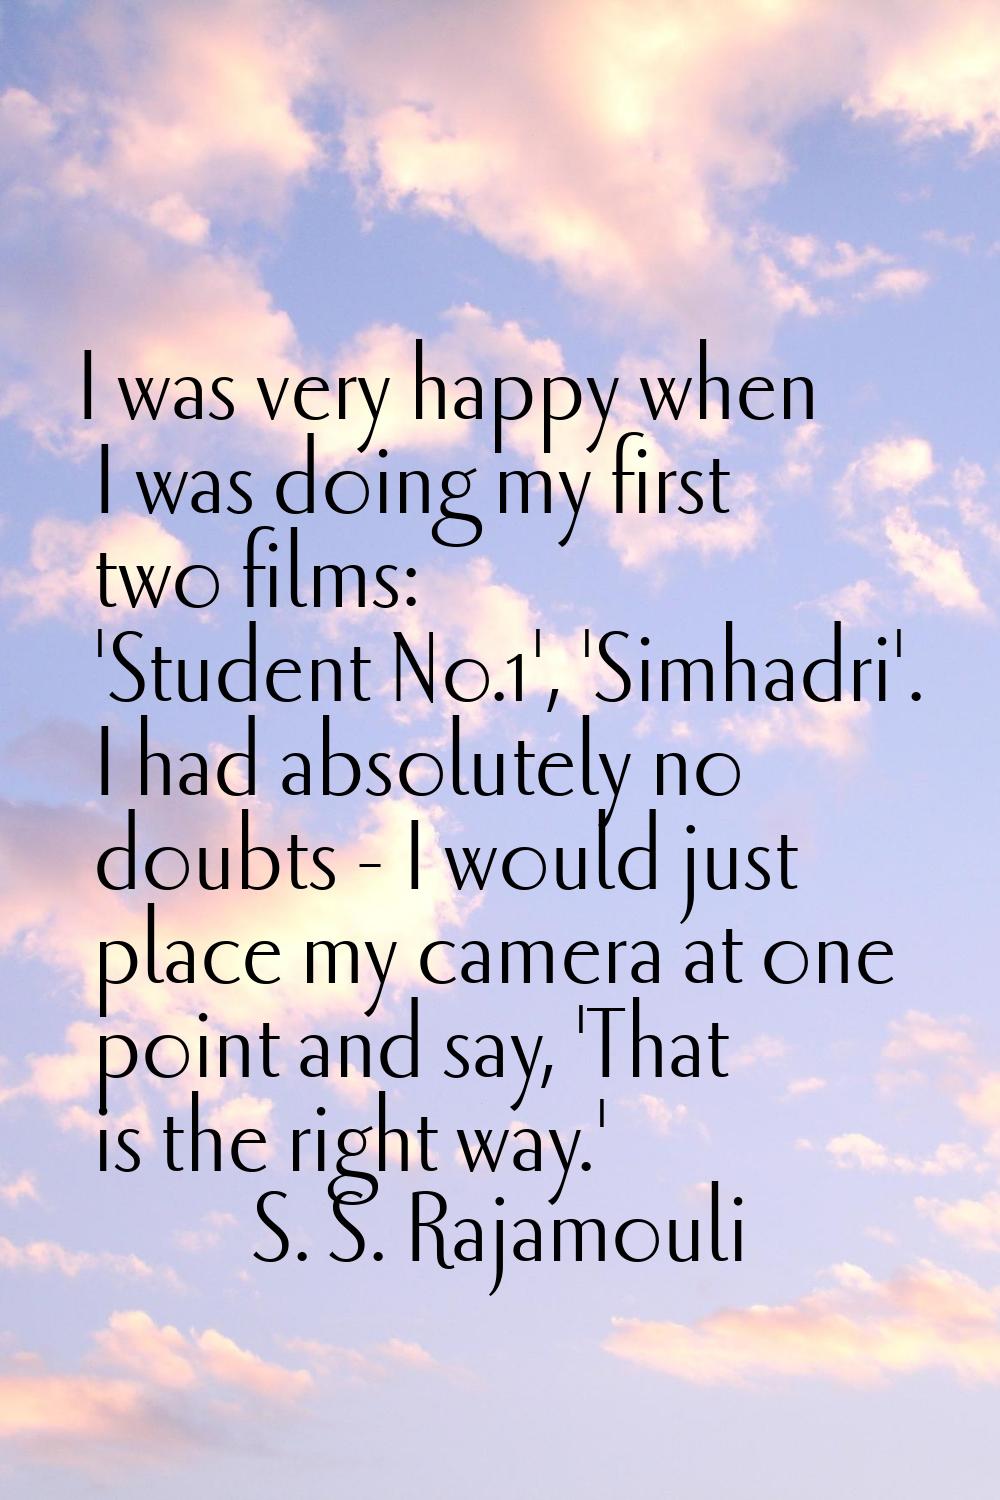 I was very happy when I was doing my first two films: 'Student No.1', 'Simhadri'. I had absolutely 